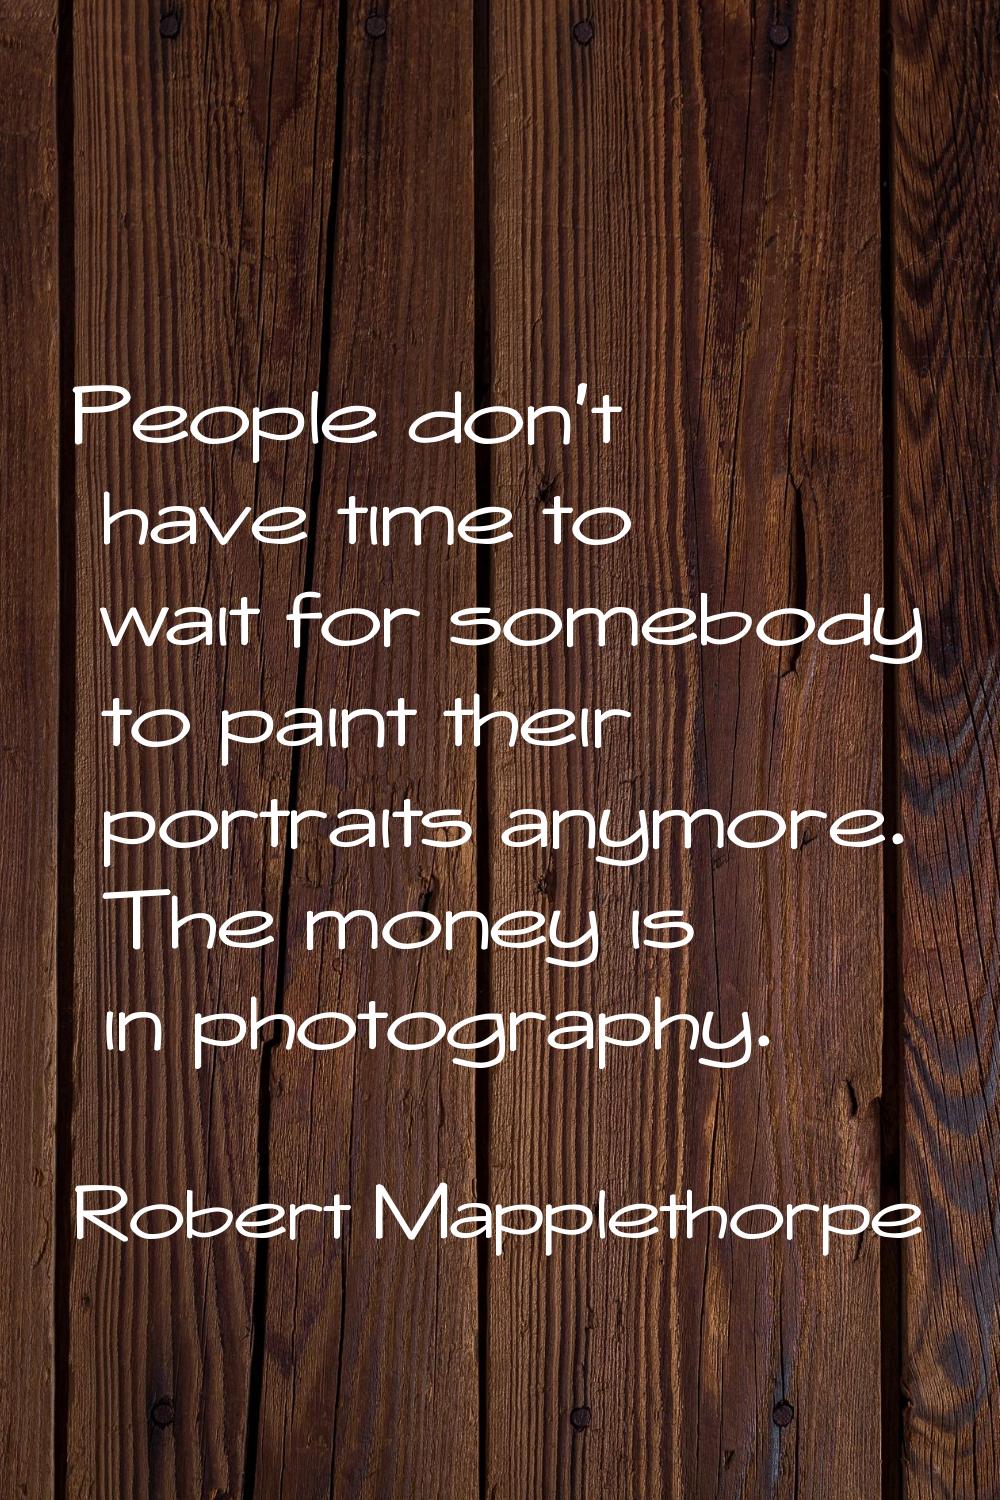 People don't have time to wait for somebody to paint their portraits anymore. The money is in photo